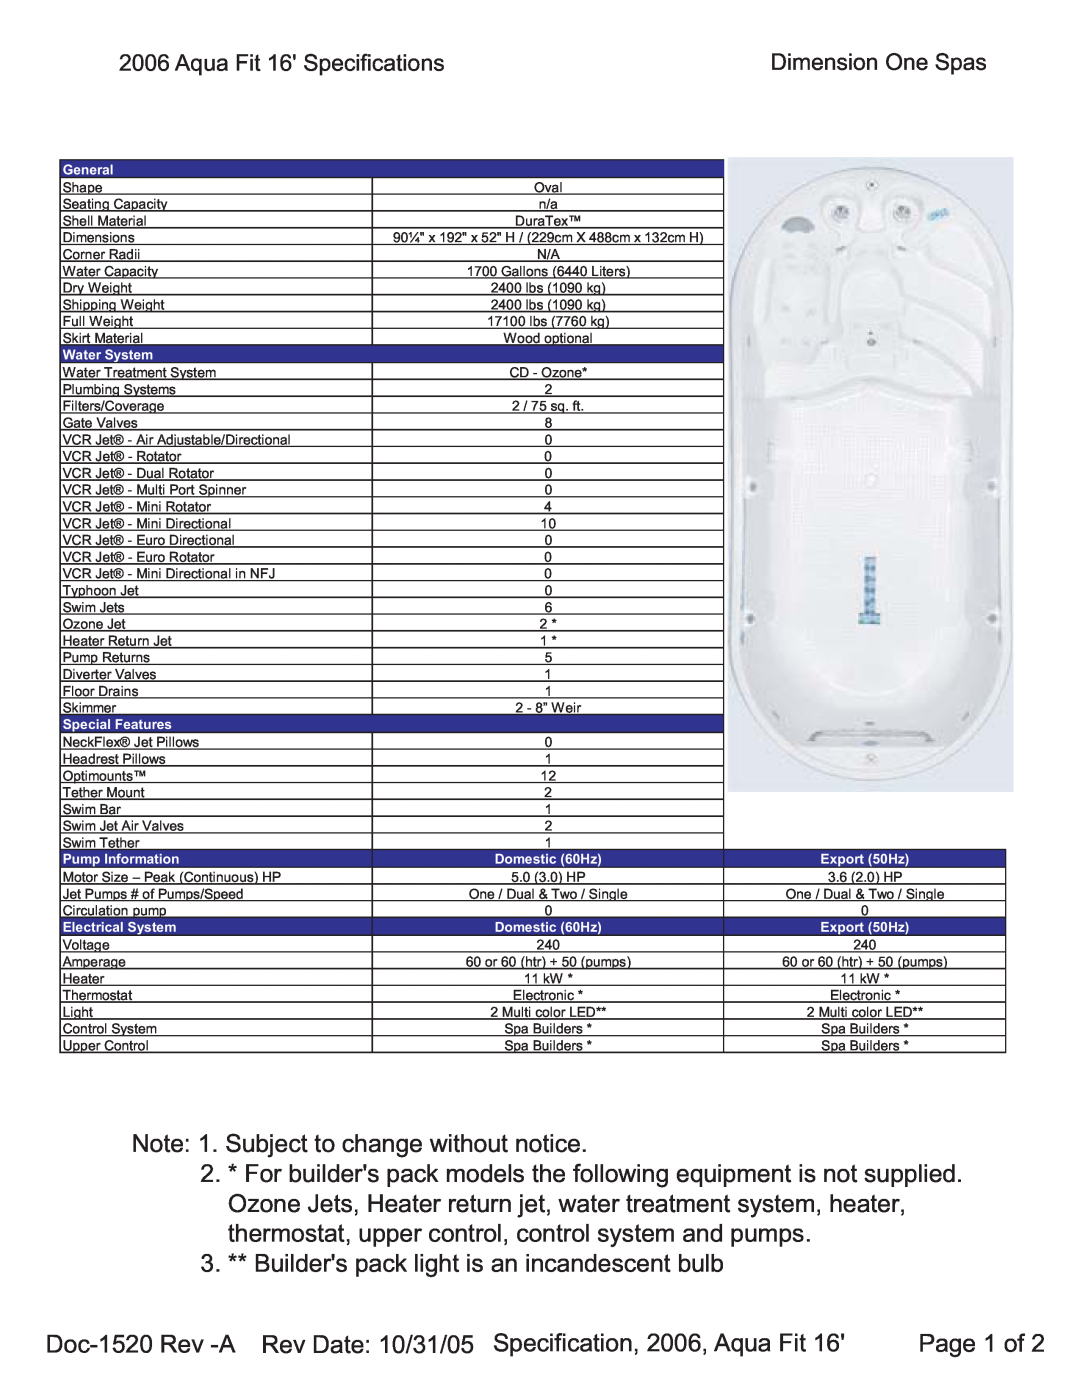 Dimension One Spas 16 specifications Page 1 of, General, Water System, Special Features, Pump Information, Domestic 60Hz 